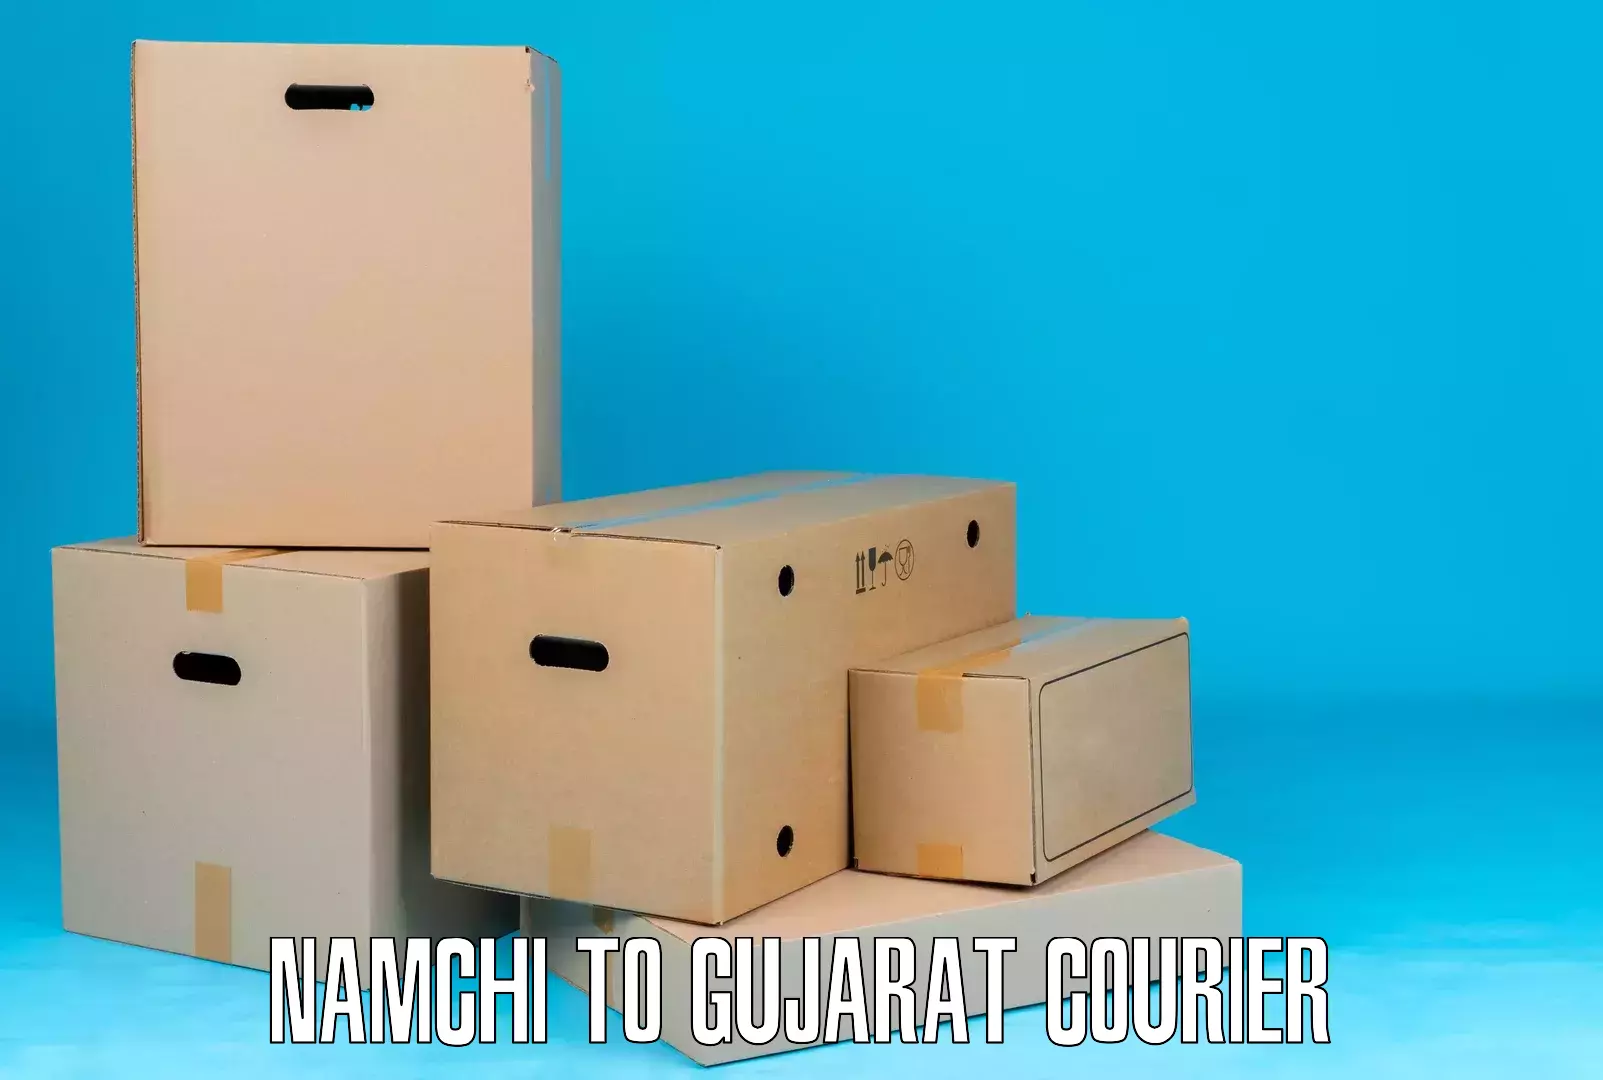 24/7 courier service in Namchi to Matar